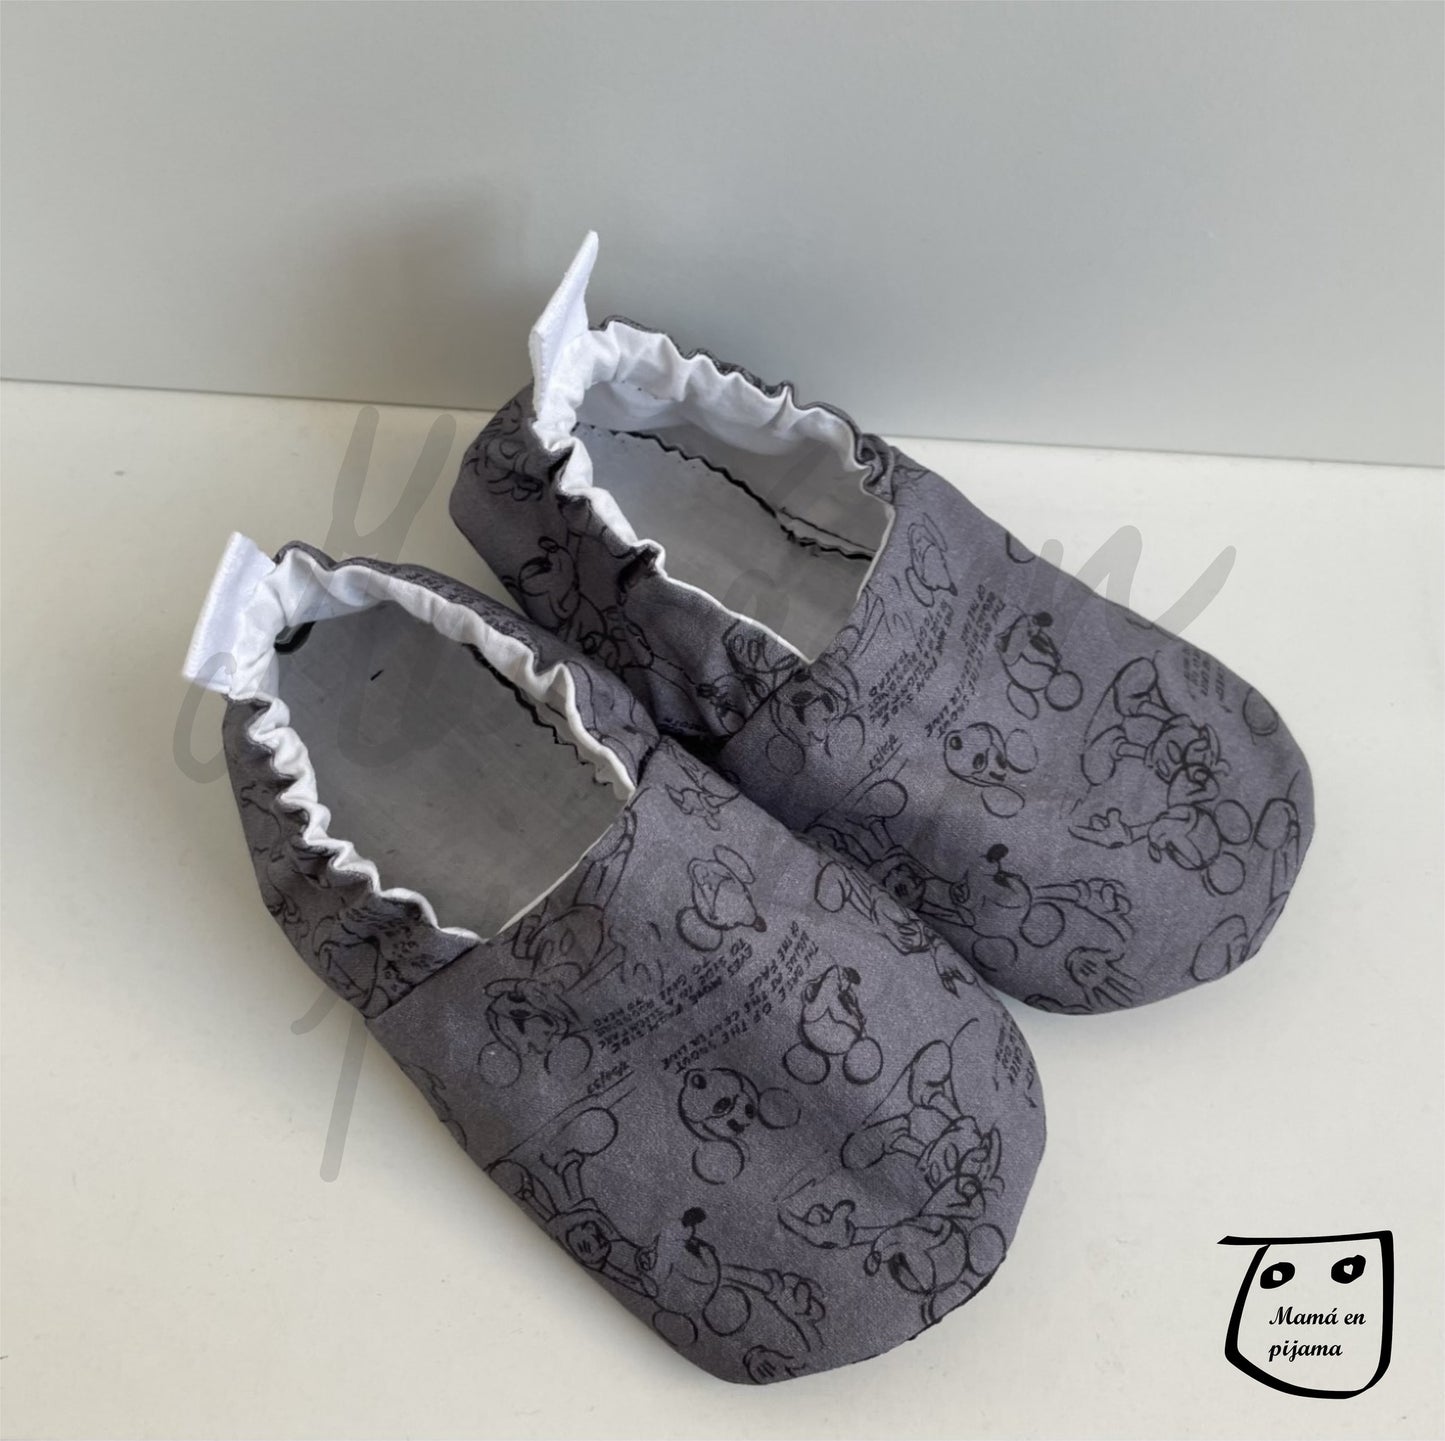 Baby Menta Shoes